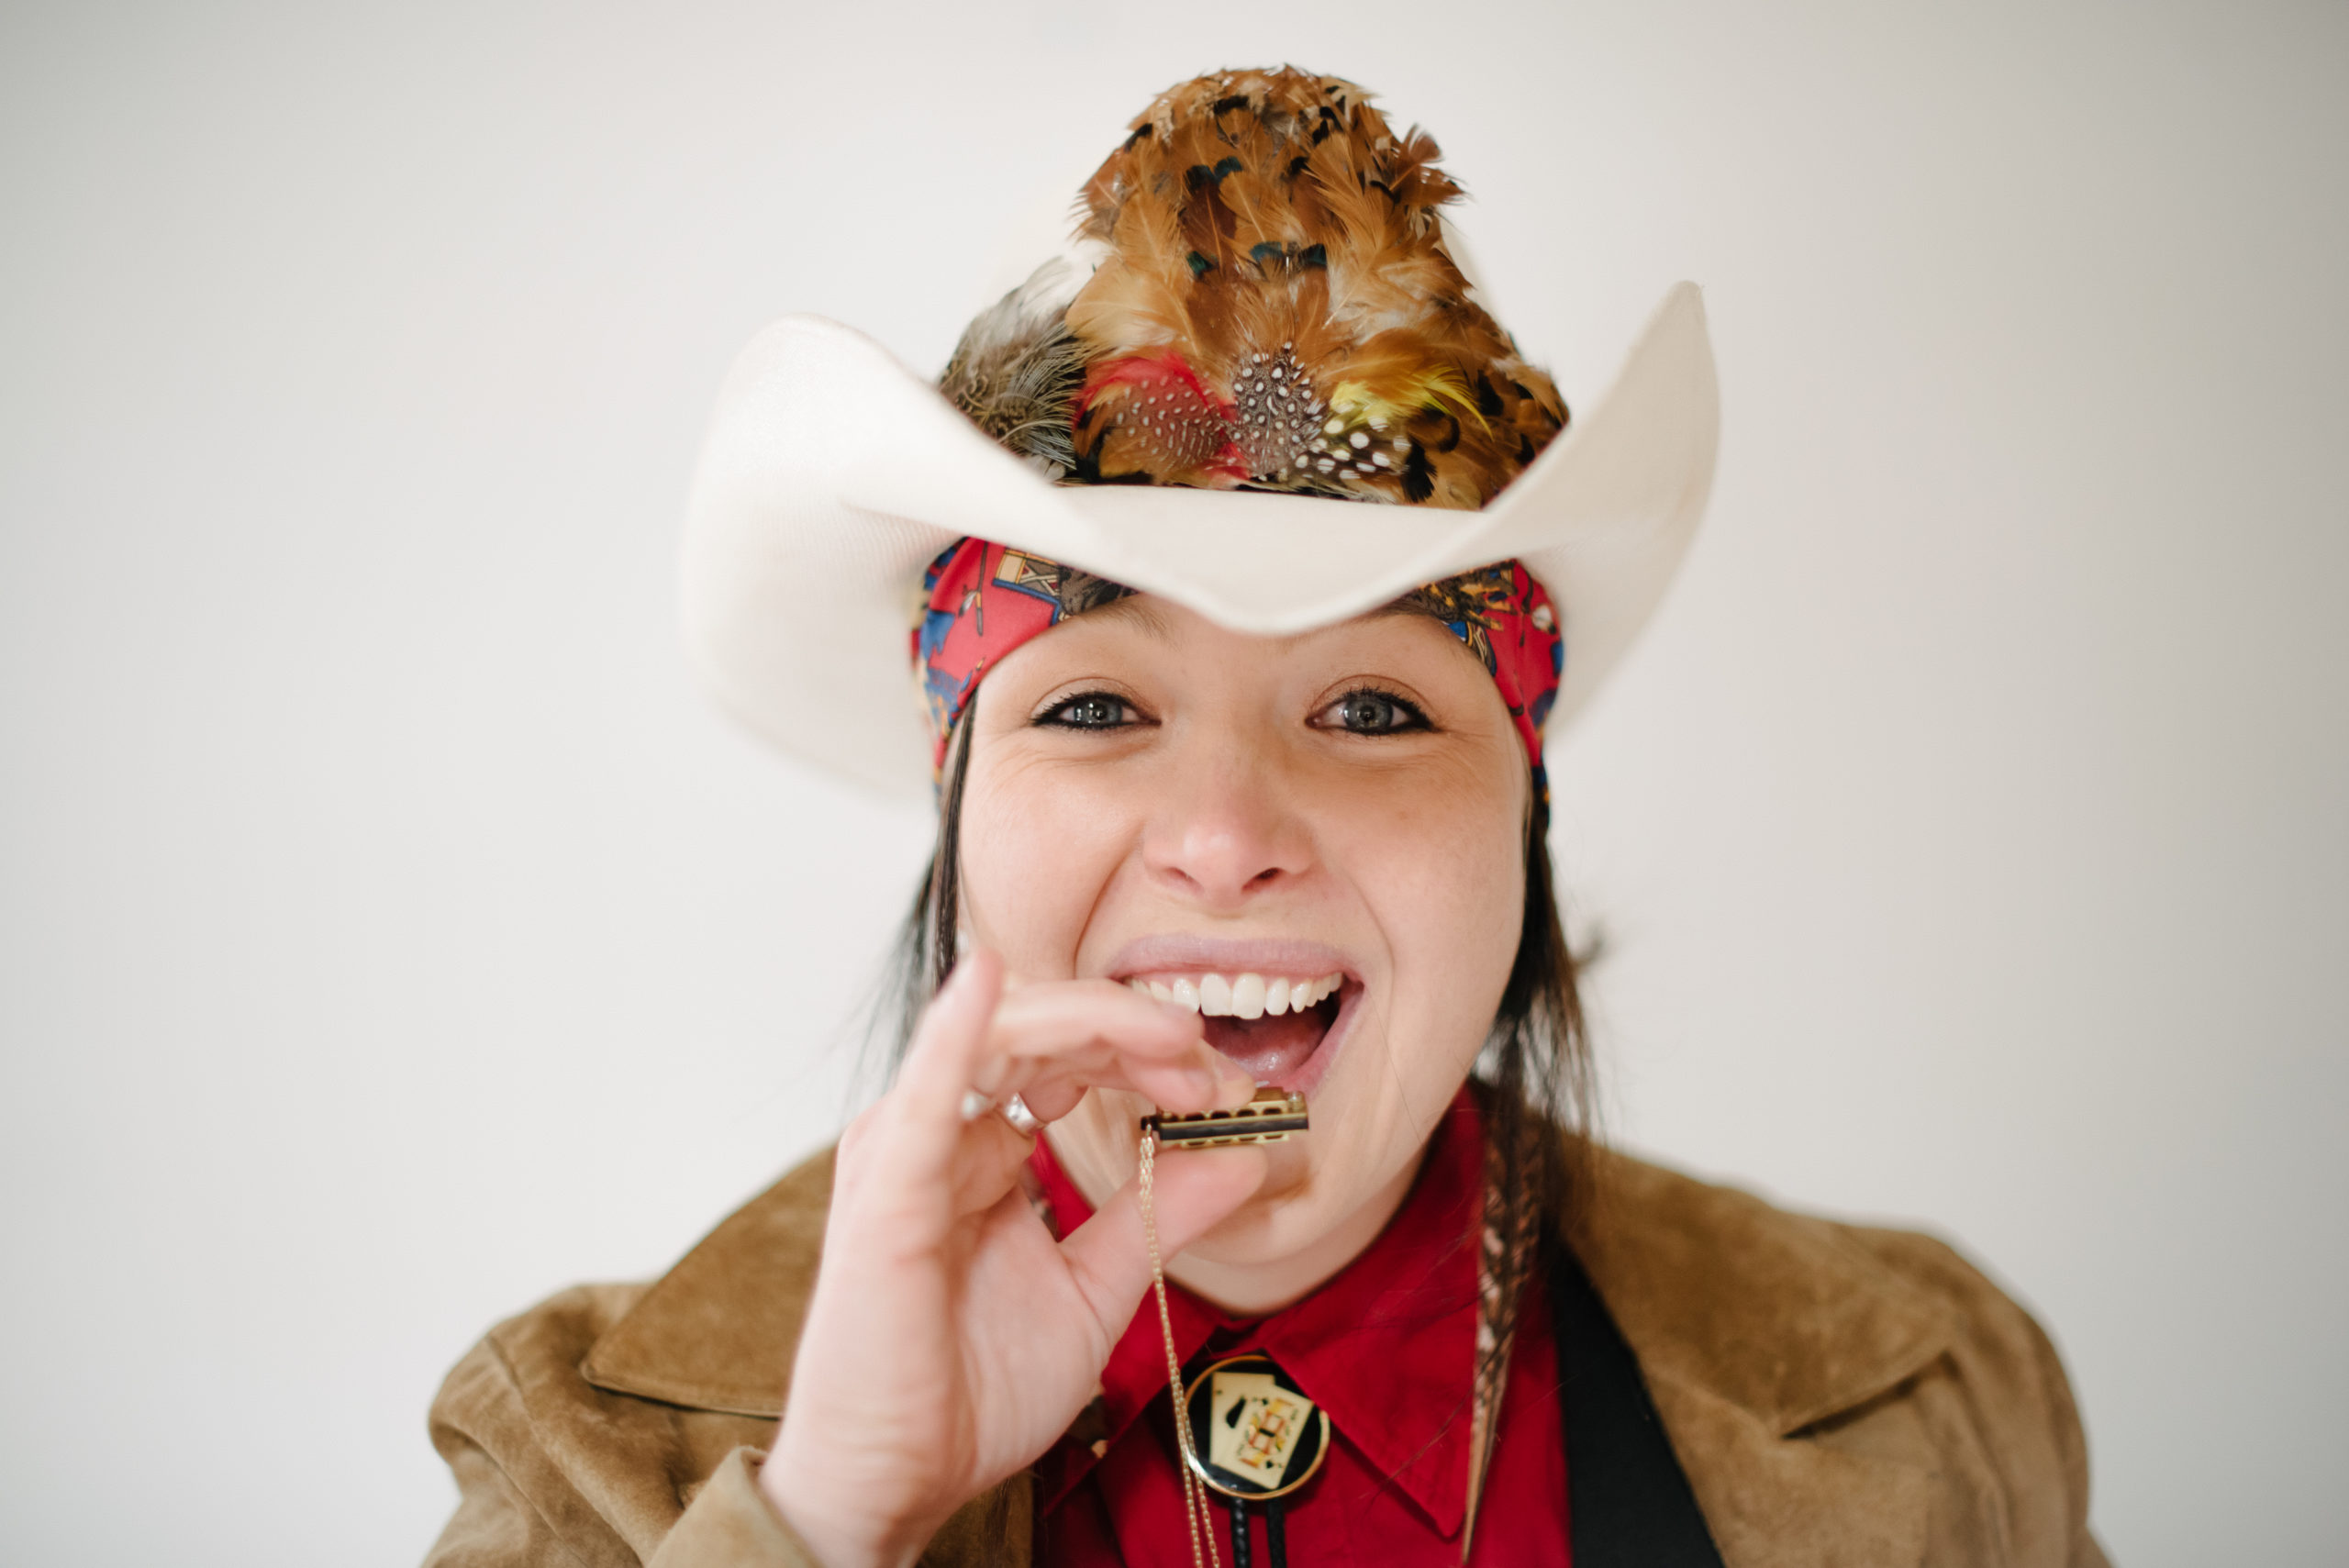 musician wearing large western hat with feathers and a bandana playing a tiny harmonica attached to a chain around her neck